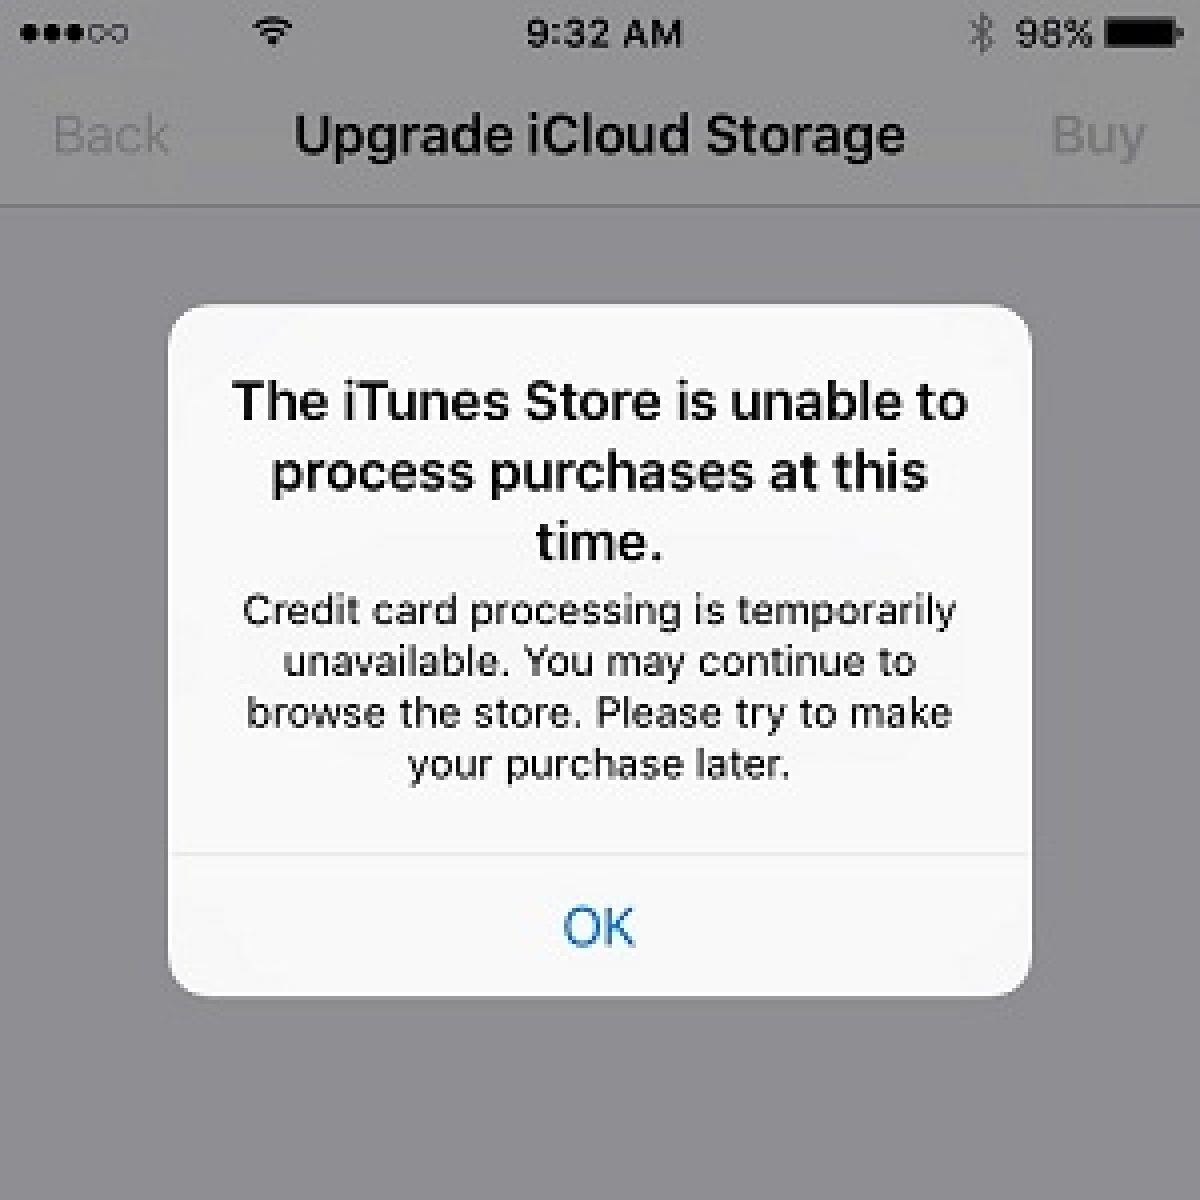 Ensure a smooth experience with your iTunes Store by resolving purchase processing errors
Retrieve your purchases from your iPhone and enjoy them on your computer